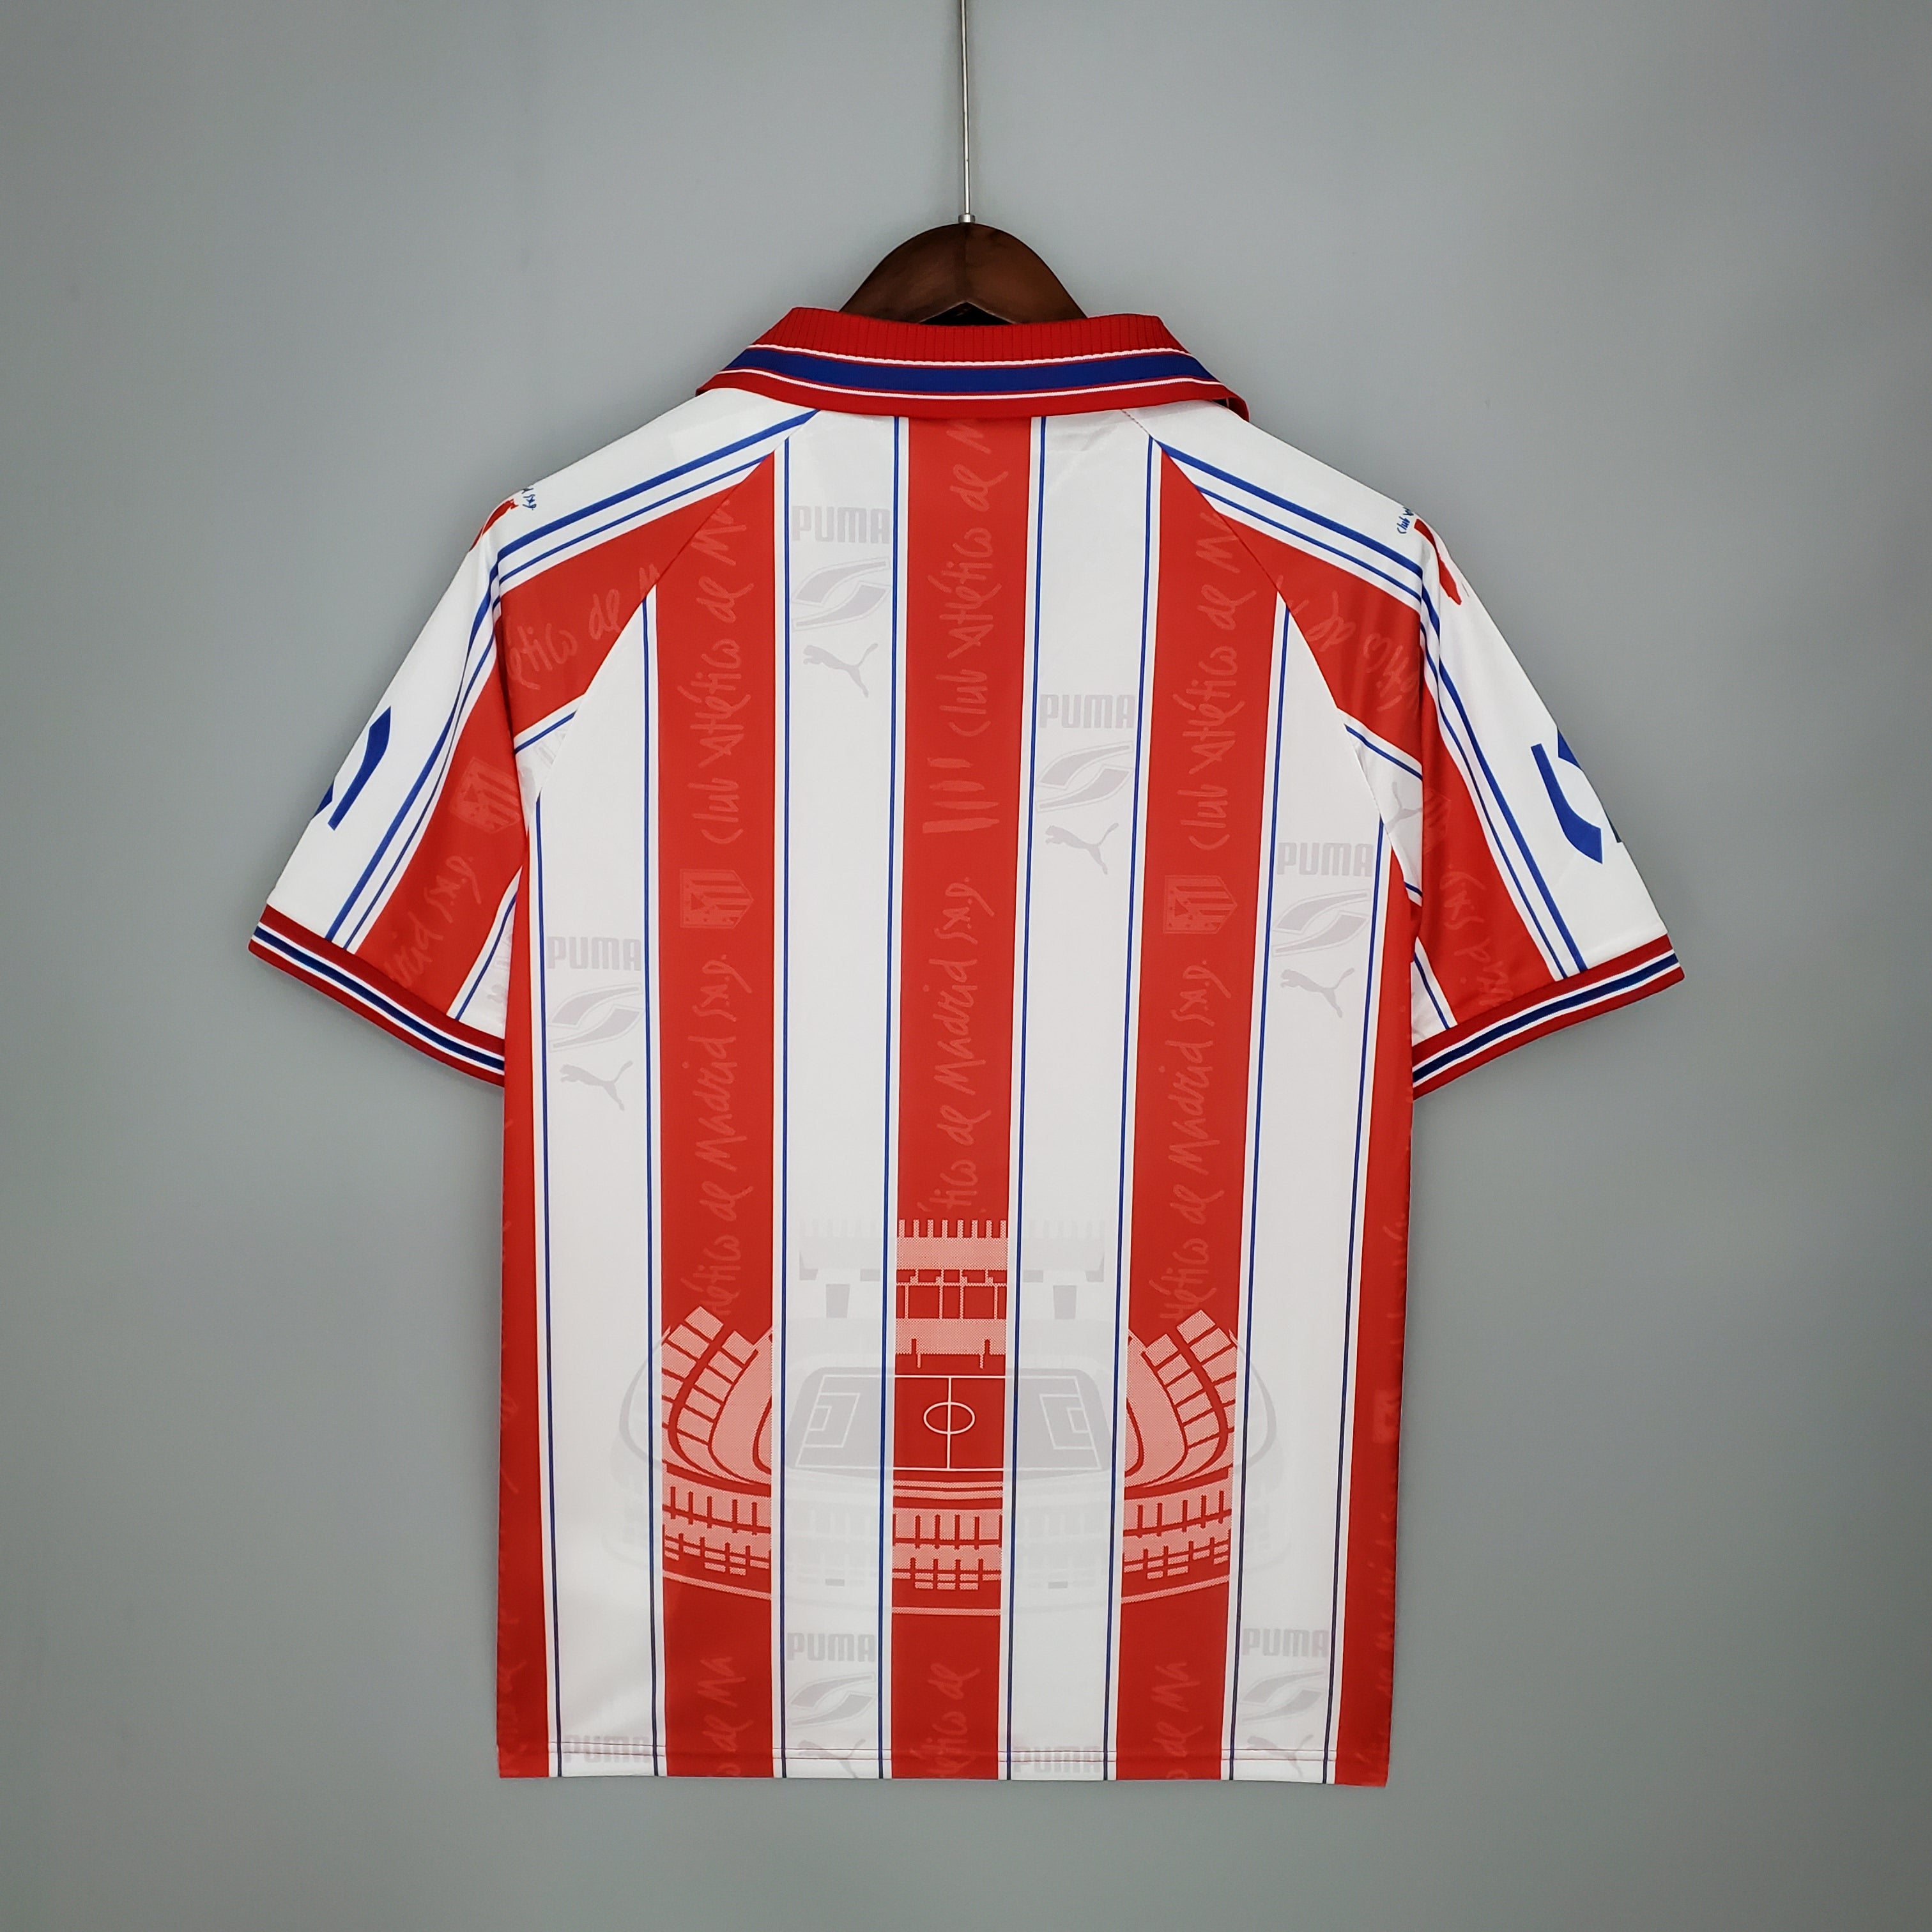 Atletico Madrid 1996-97 Home Jersey